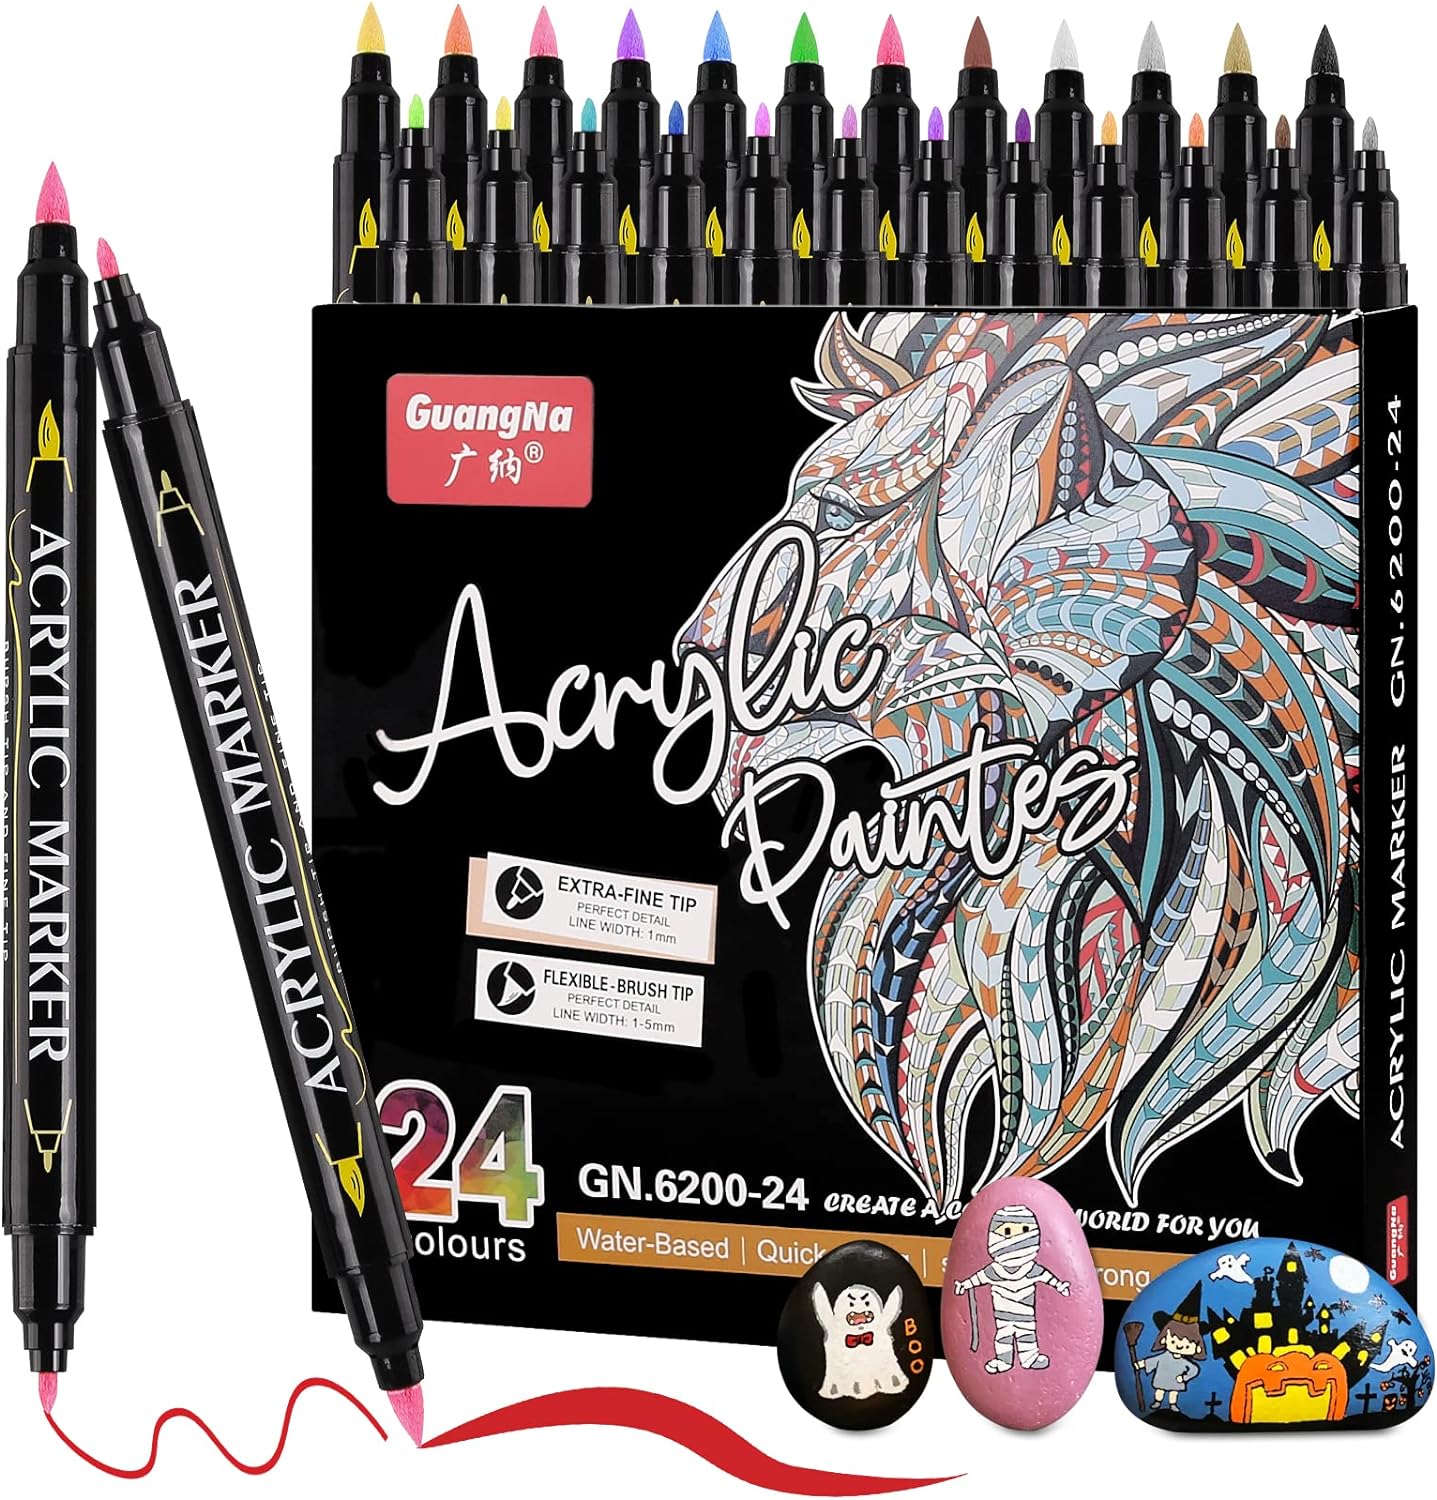 Guangna 24 Colors Dual Brush Tip Acrylic Paint Markers - TTpen